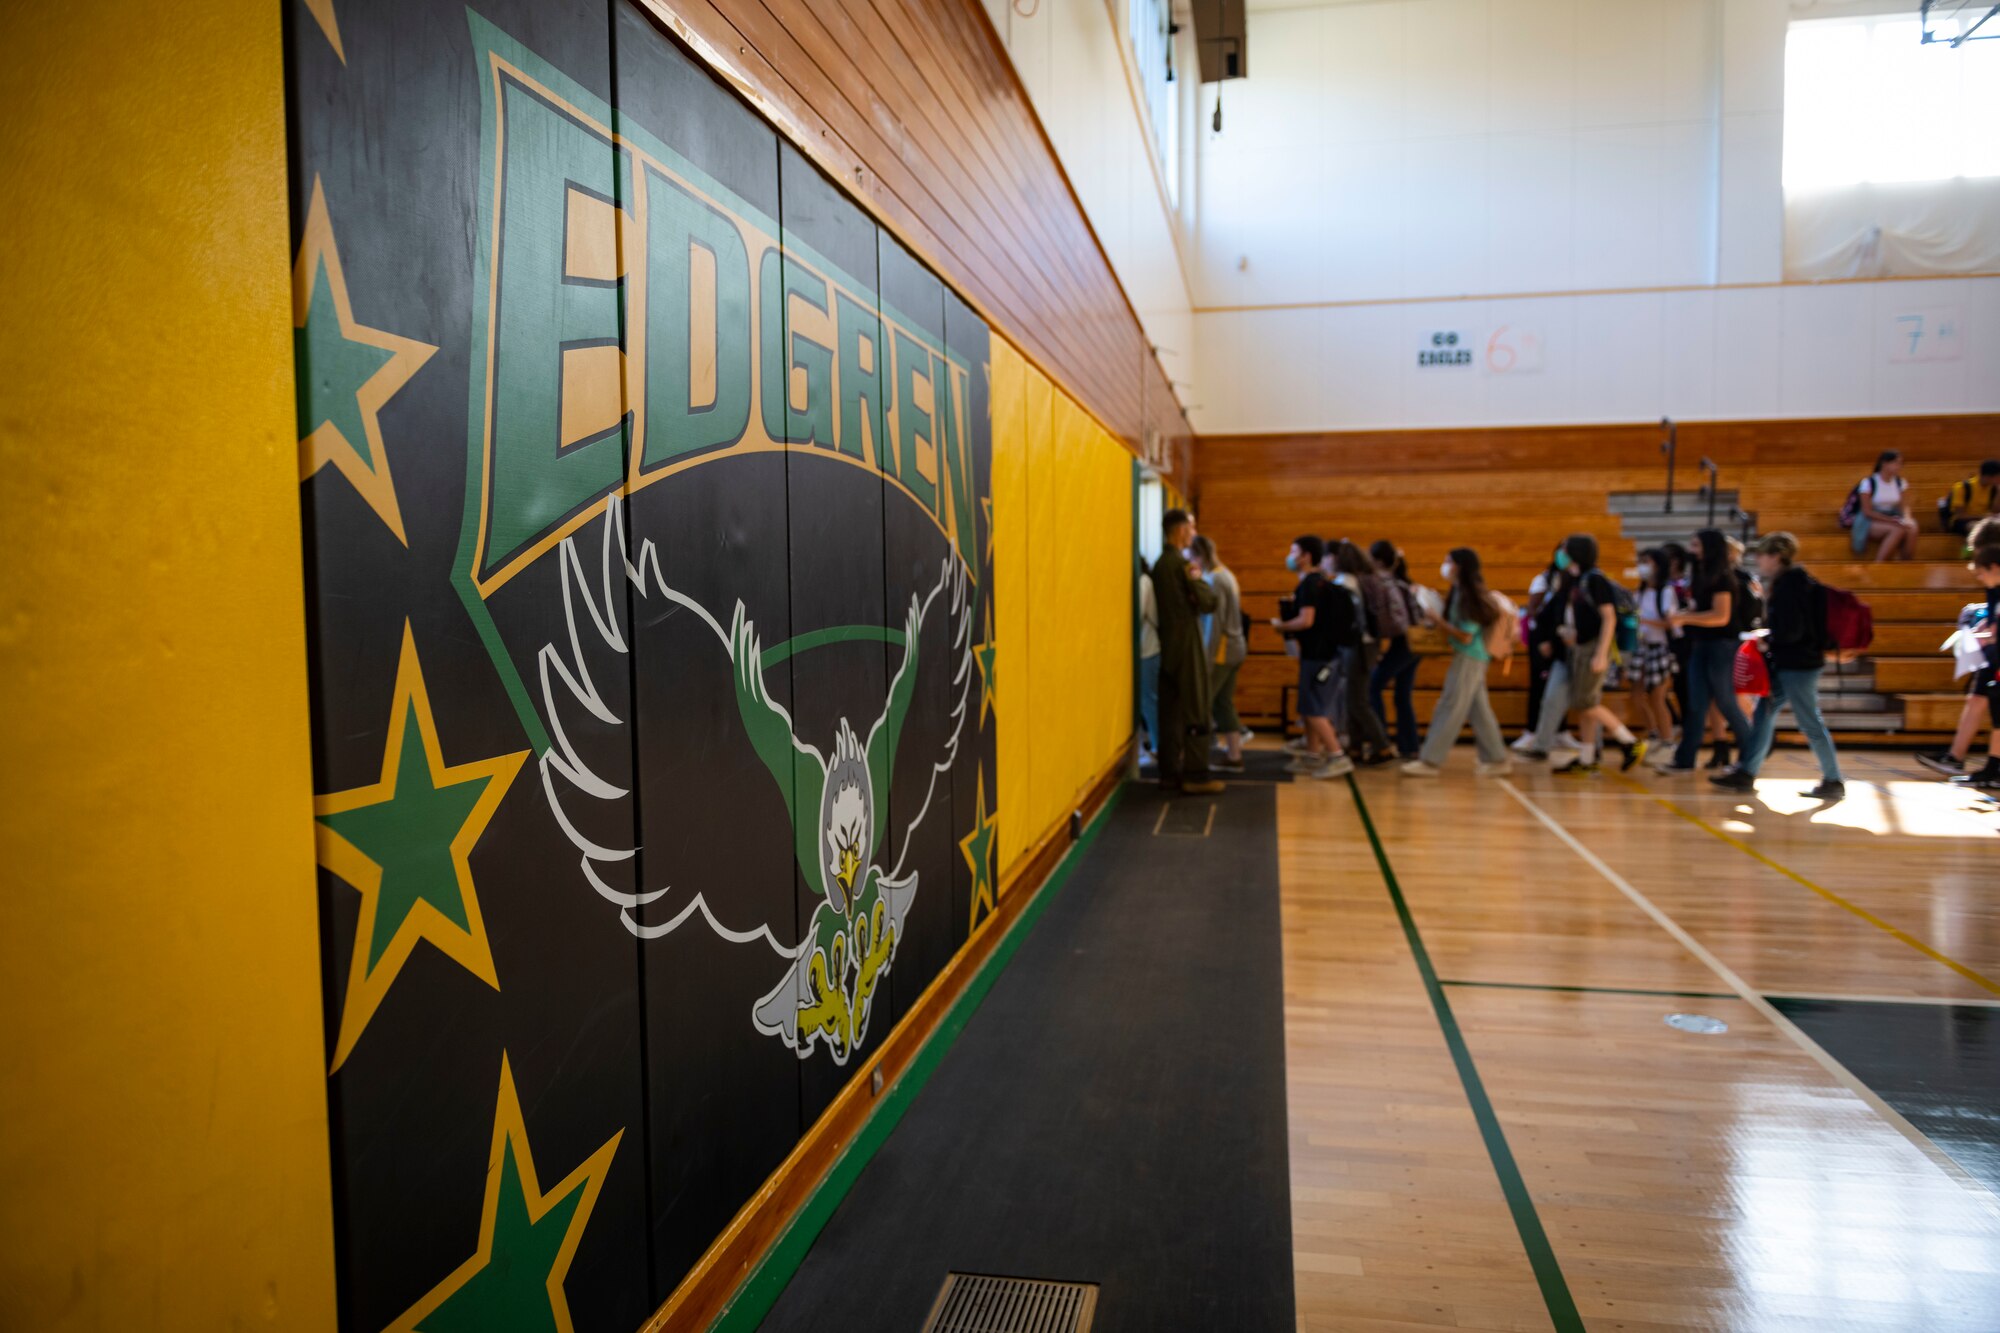 A sign titled Edgren with an eagle is displayed in a gym.